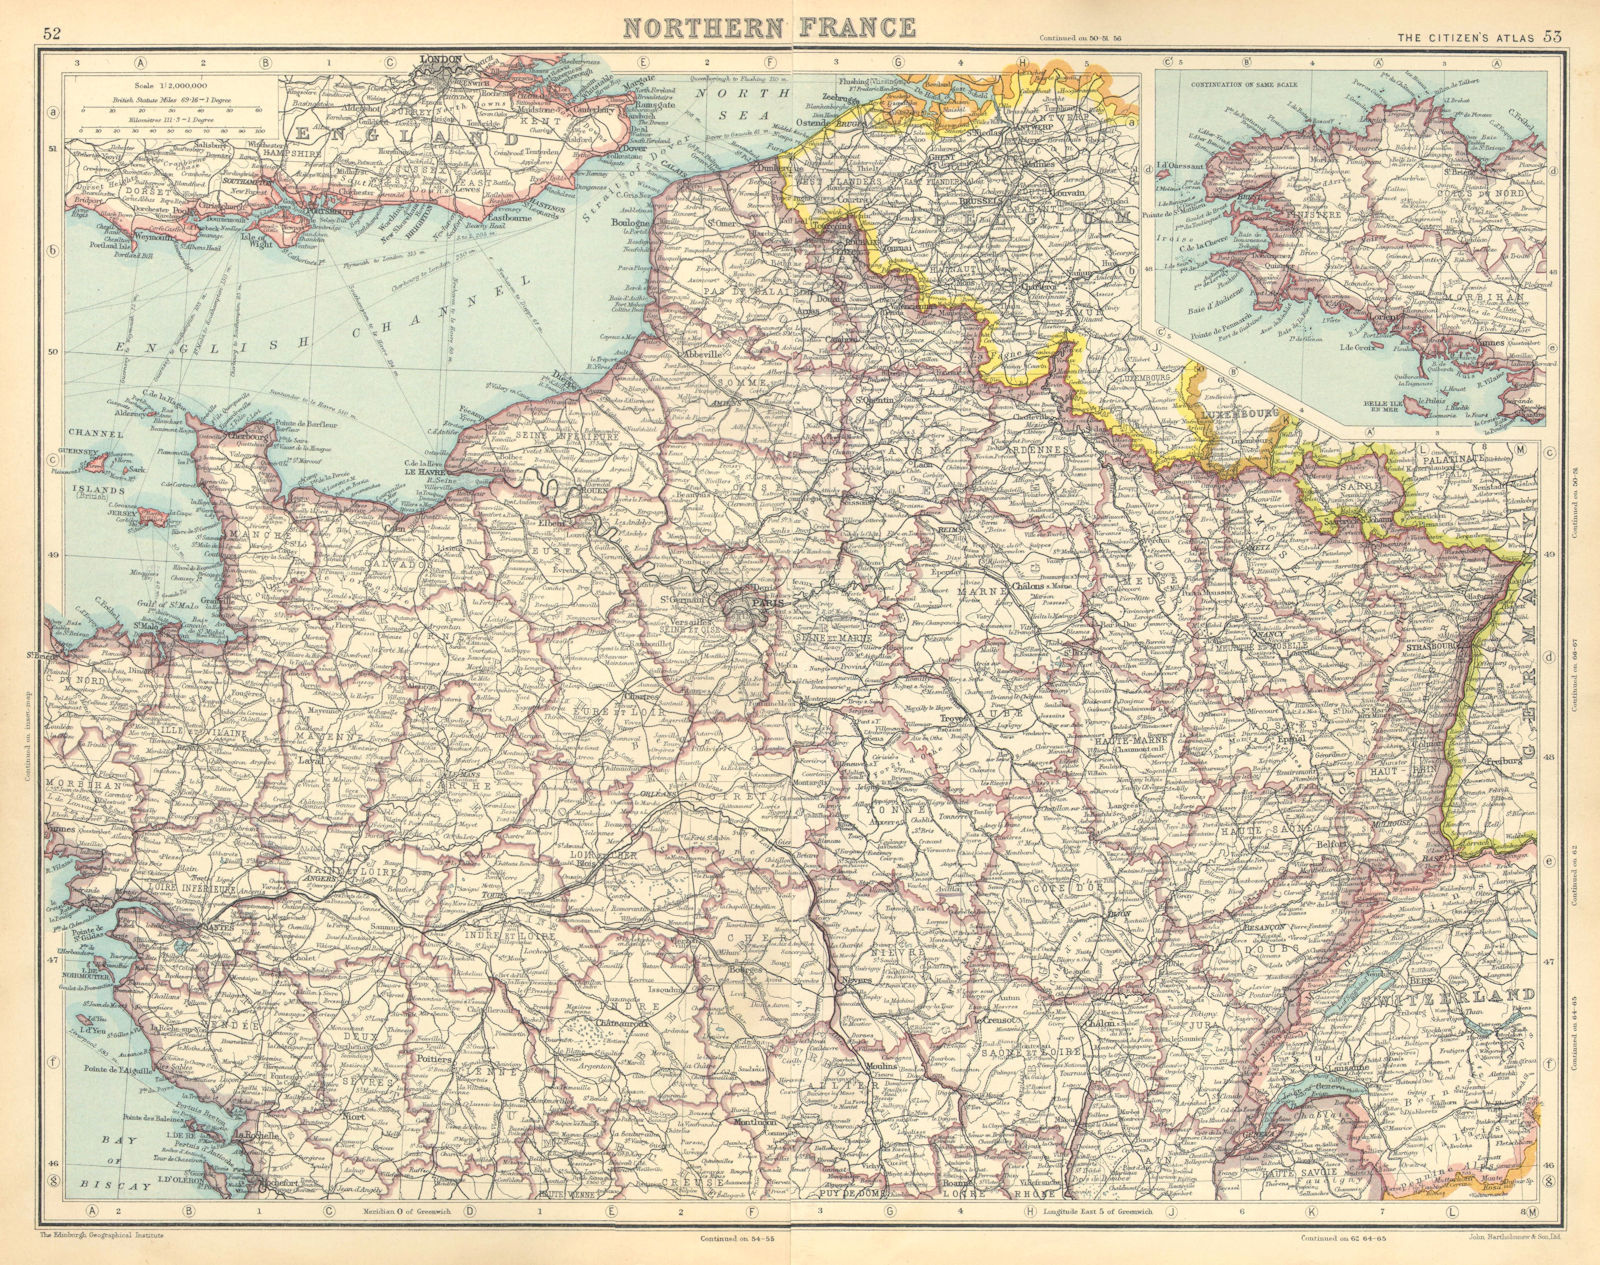 Associate Product NORTHERN FRANCE. Saar Basin Territory under League of Nations mandate 1924 map